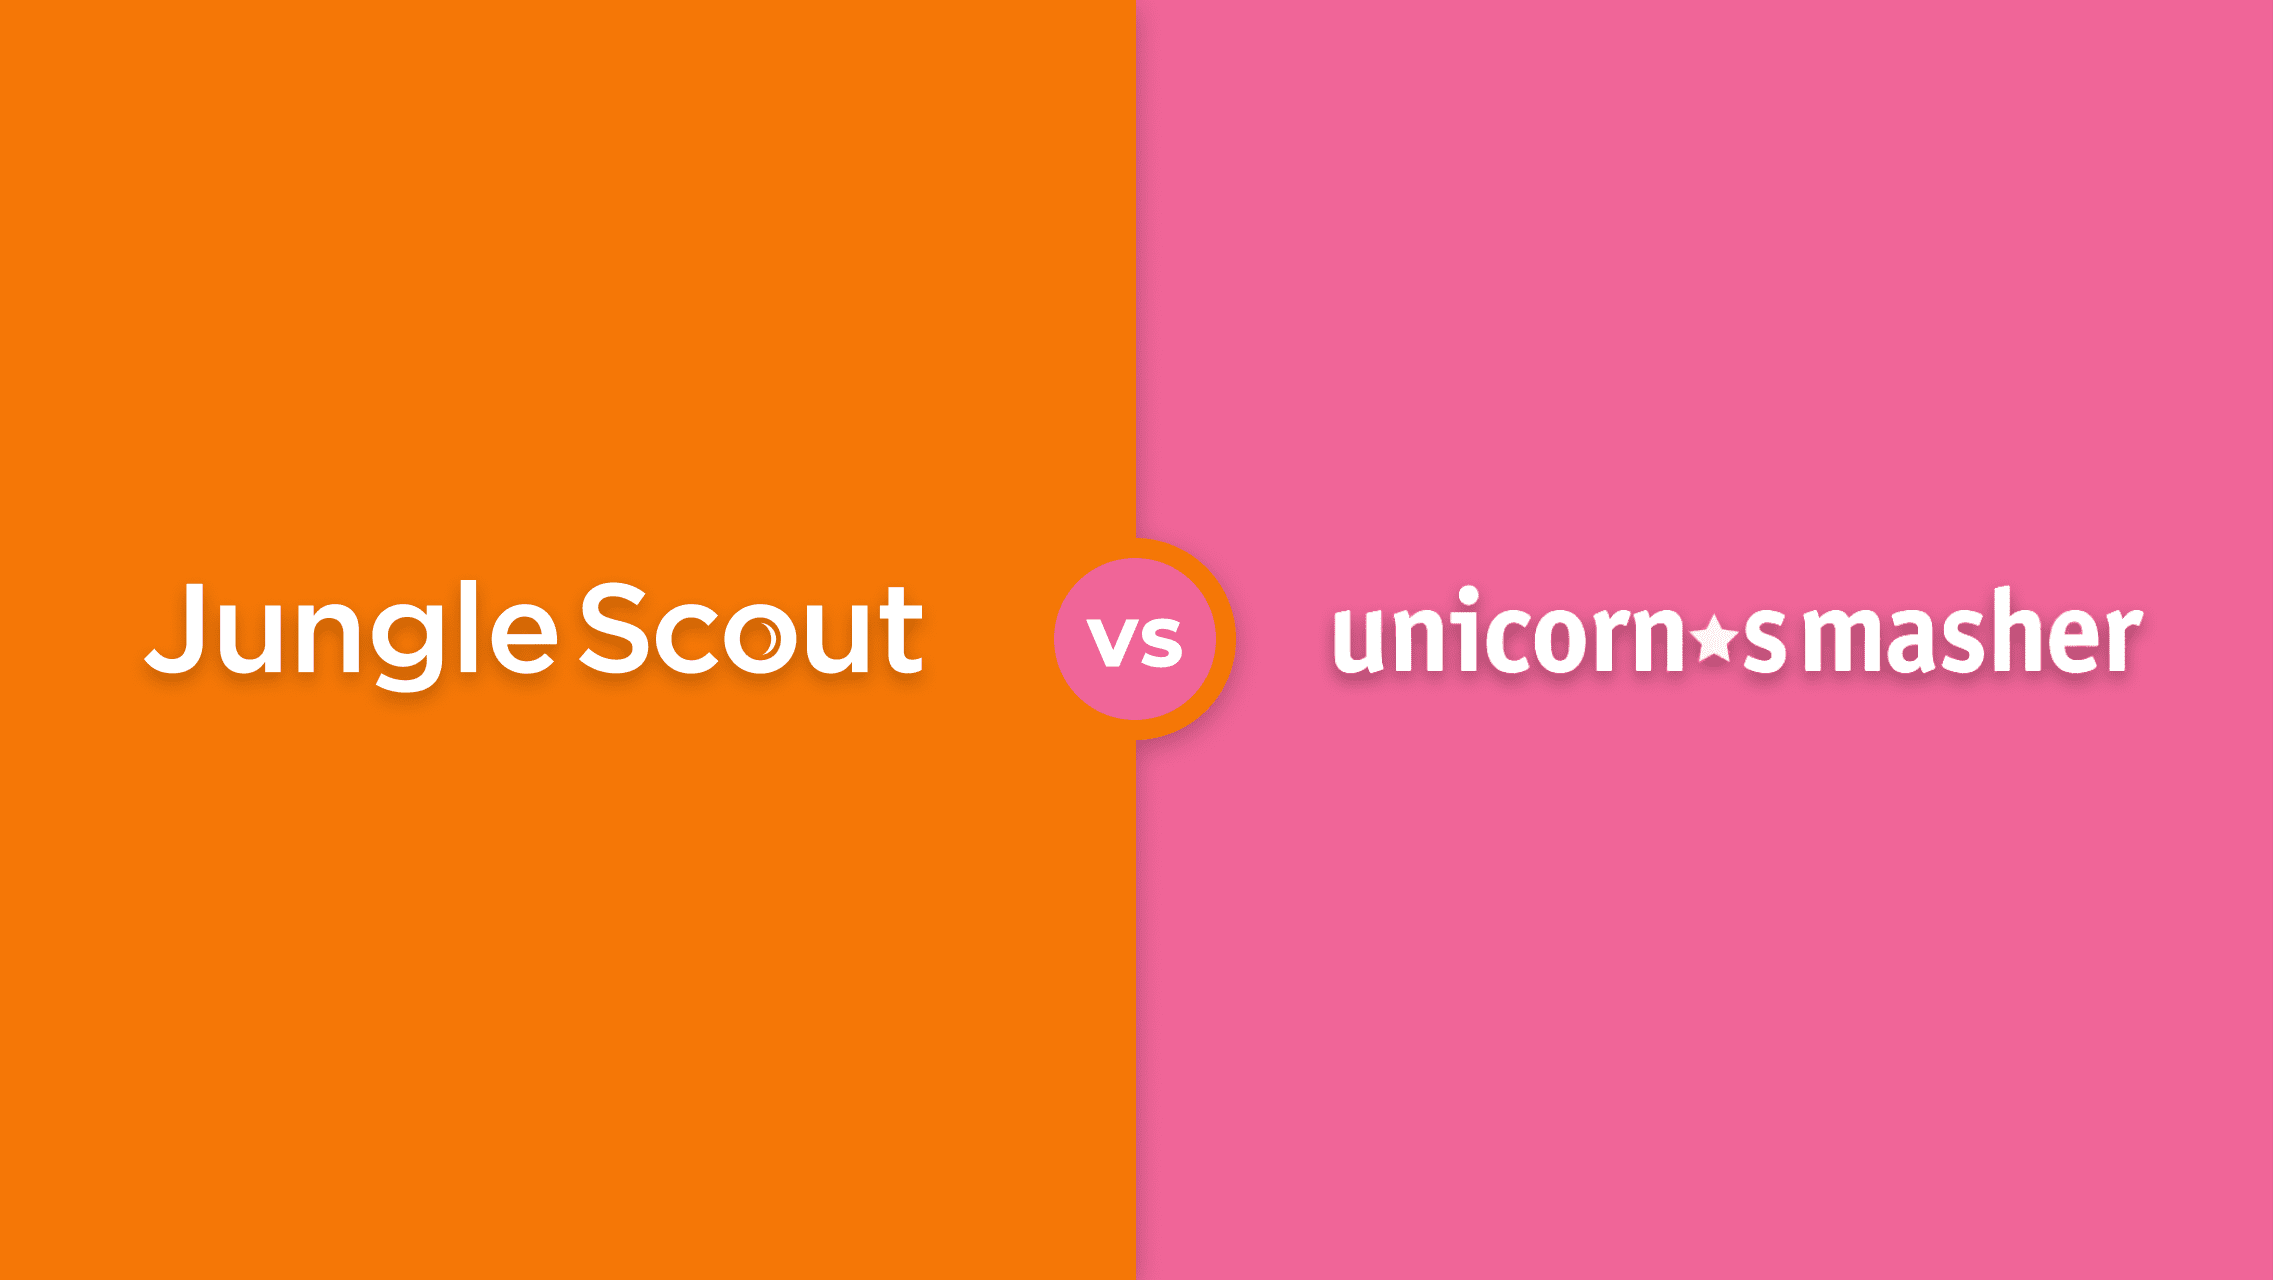 Jungle Scout vs Unicorn Smasher: Which tool is better for Amazon FBA sellers?